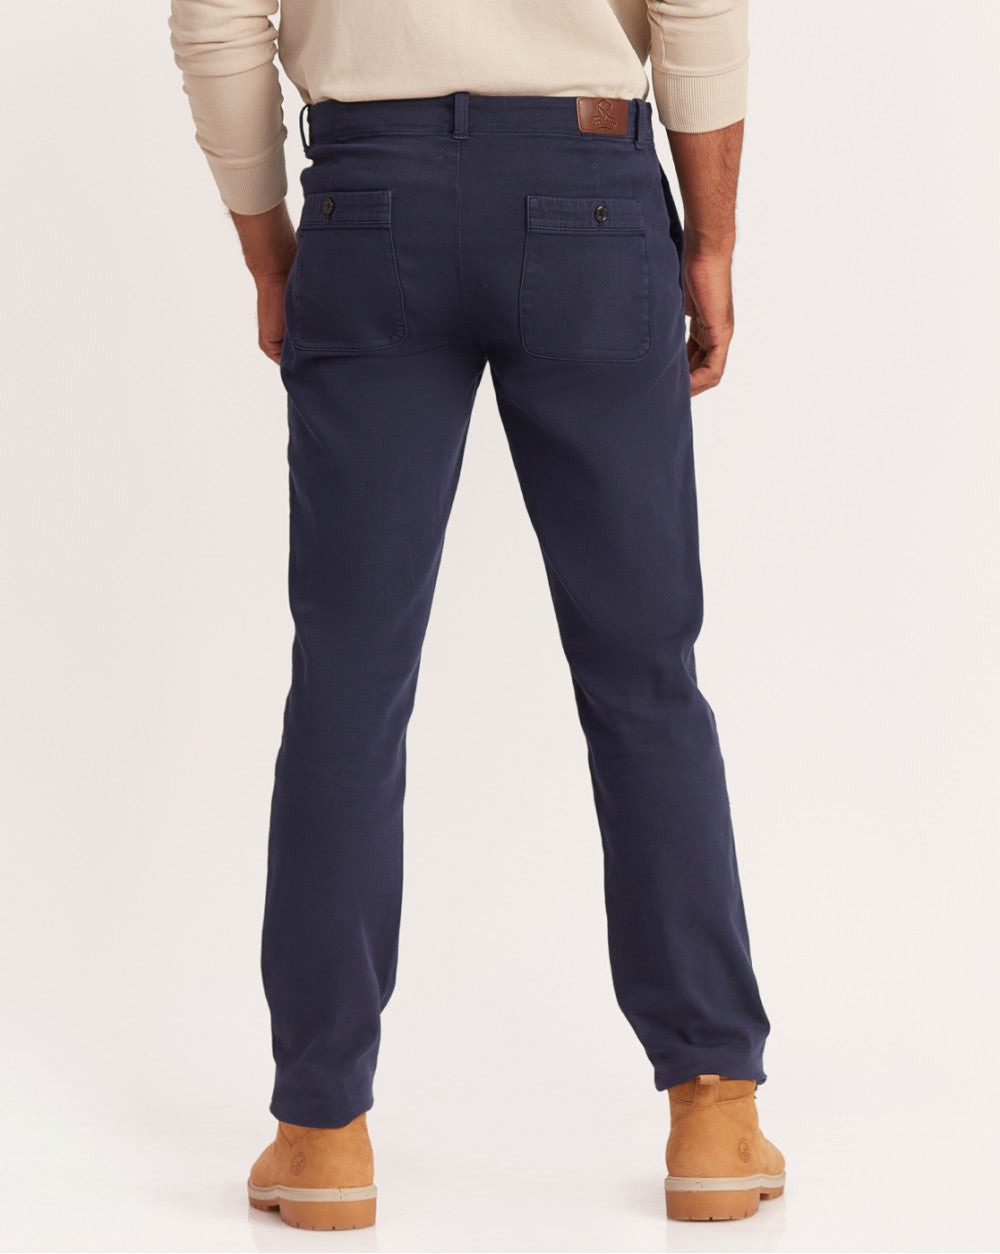 Straight Fit Garment Dyed Outdoor Chinos - Navy